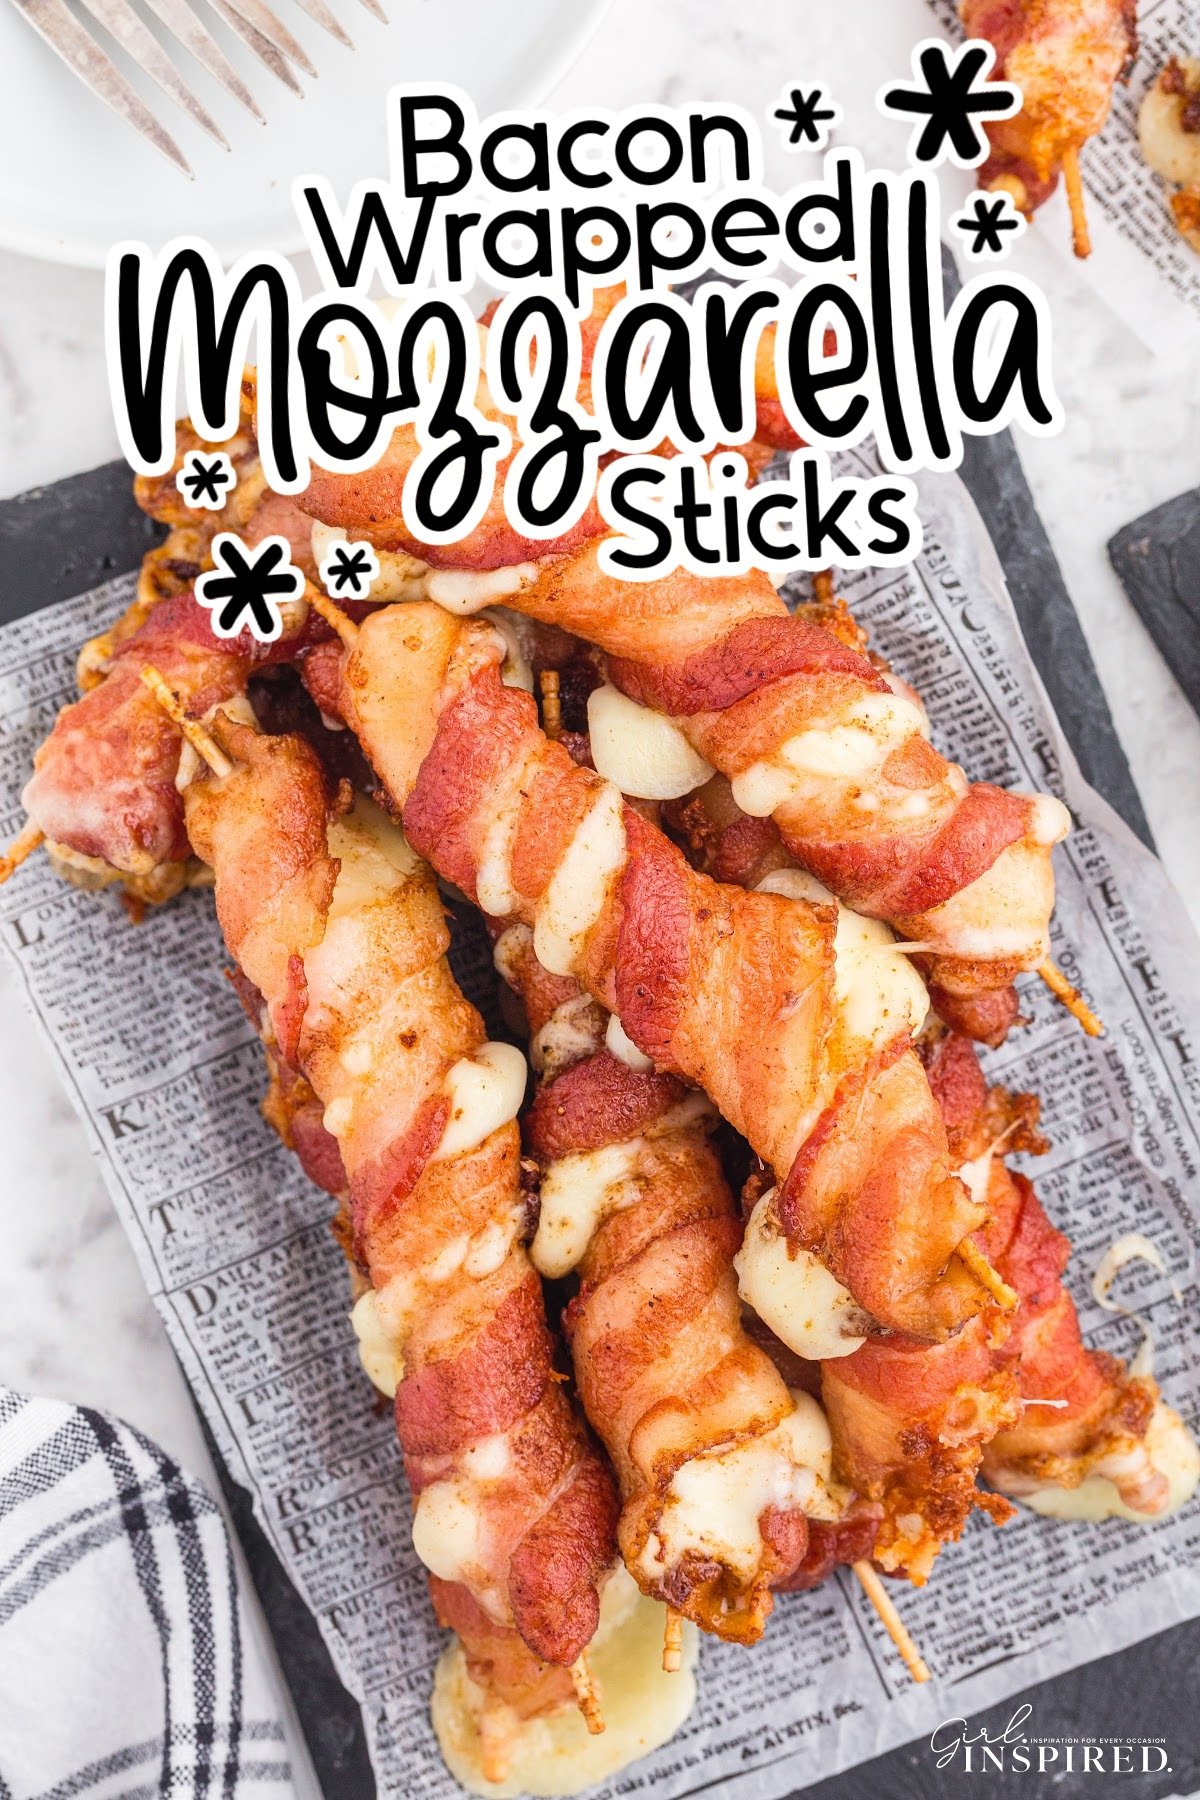 Bacon wrapped mozzarella sticks on a paper lined serving board with text overlay.